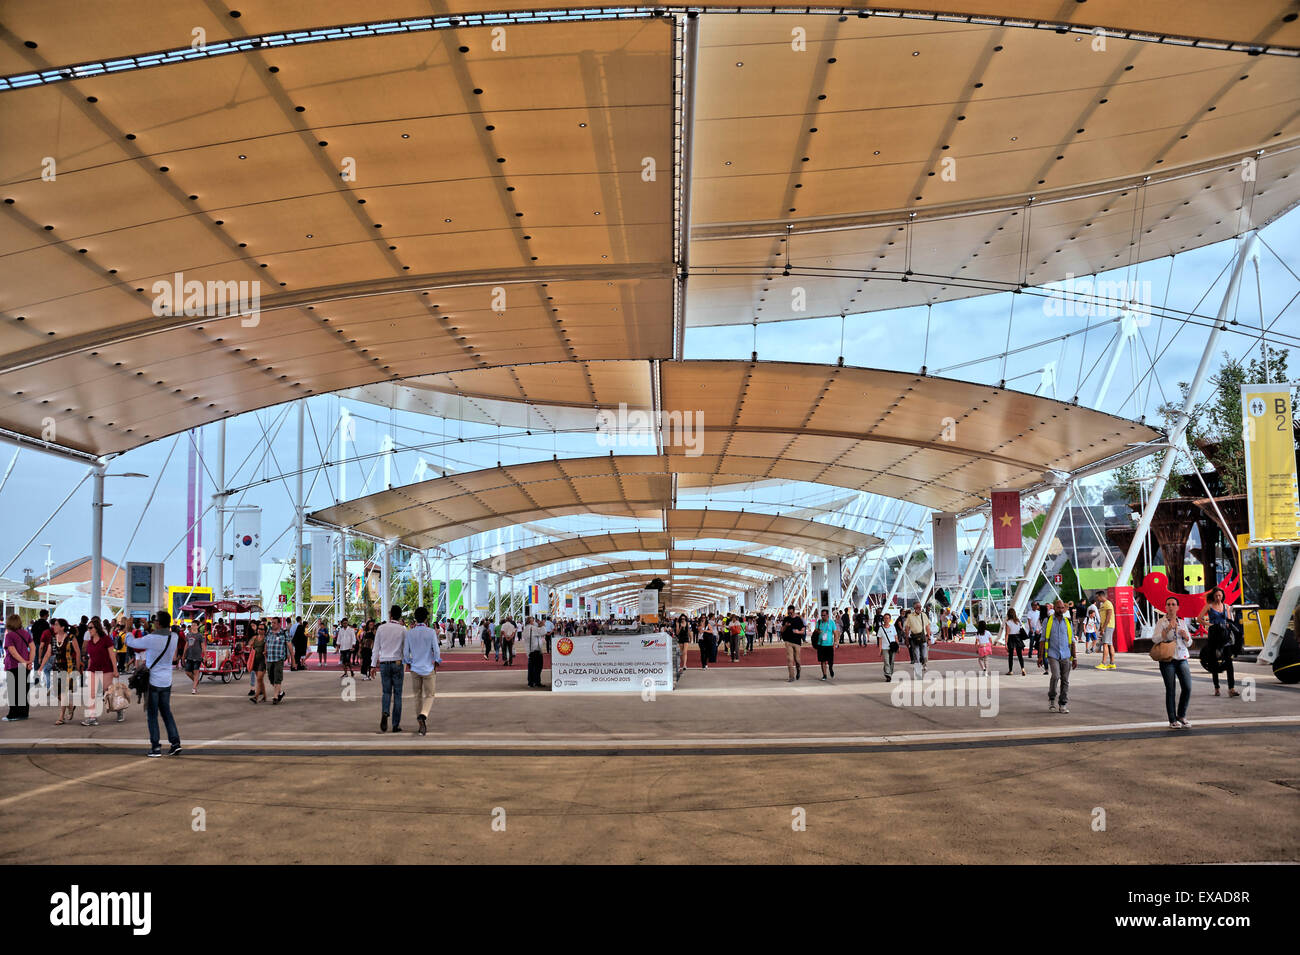 Start of the 1.5km roofed main street of the Expo 2015, theme: Feeding the Planet, Energy for Life, EXPO Milan 2015 Milan Stock Photo